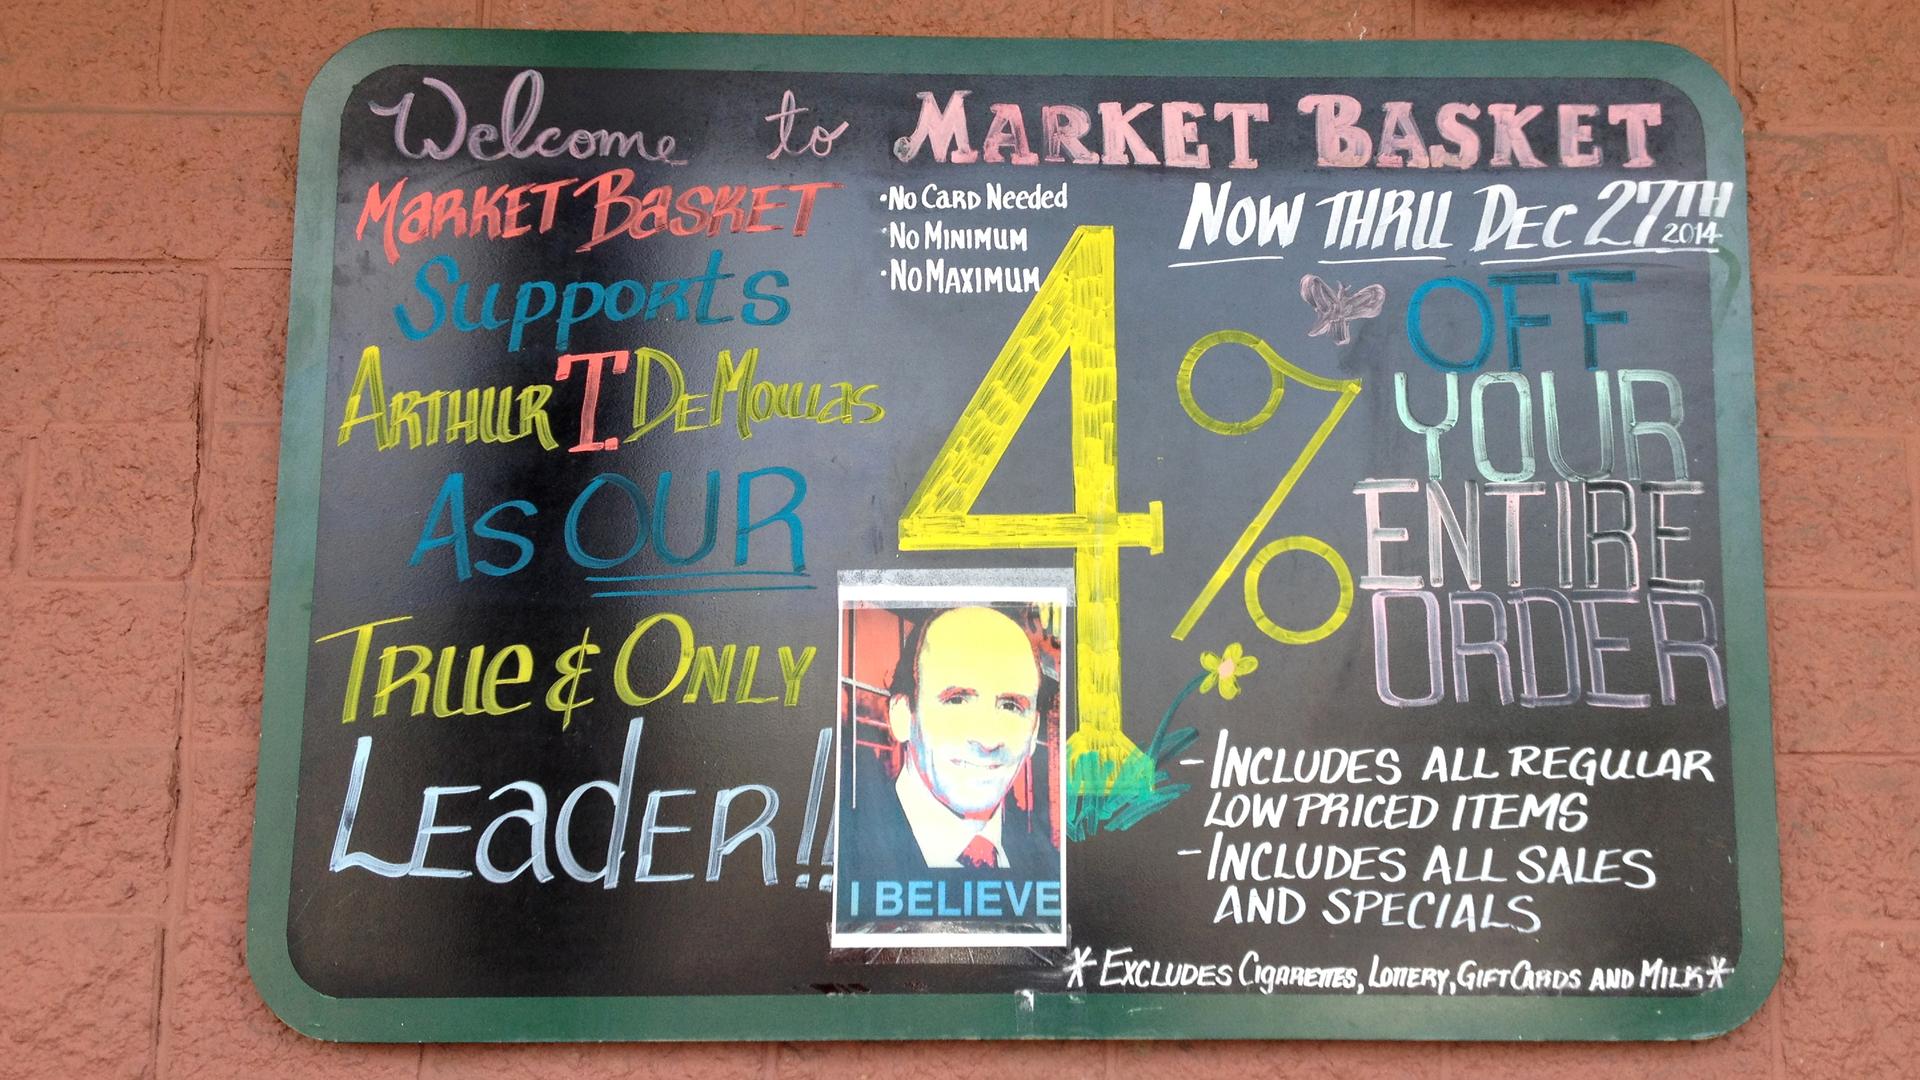 During the worker-led protest, posters of Market Basket's CEO, Arthur T. Demoulas, were plastered to the walls of this grocery store in Somerville, Mass. Arthur T, as he was affectionately called, recently regained control of the company after the board f